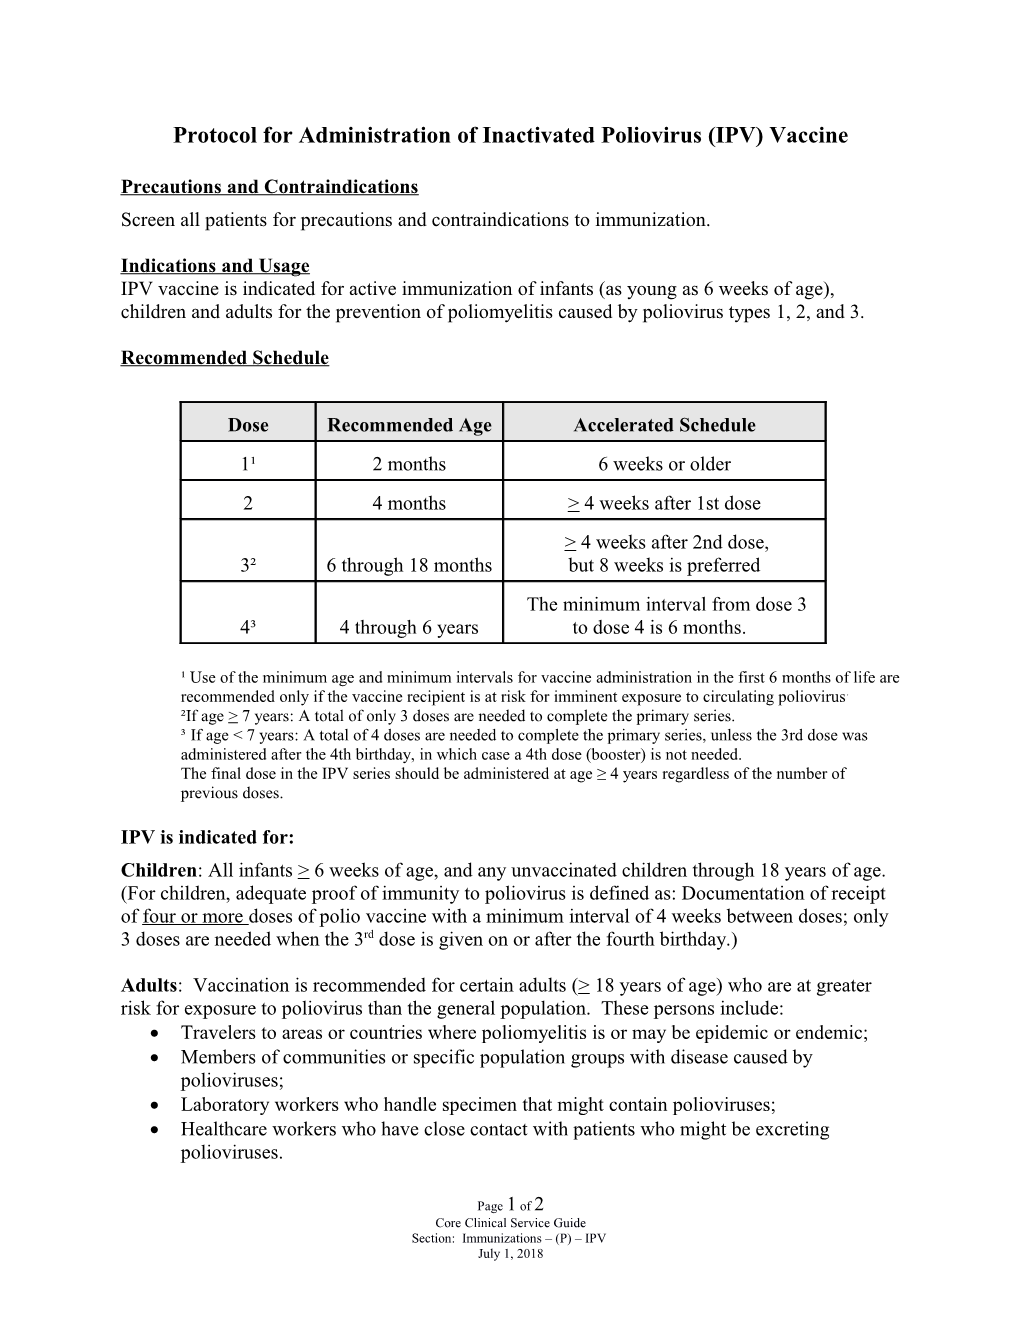 Protocol for Administration of Inactivated Poliovirus (IPV) Vaccine